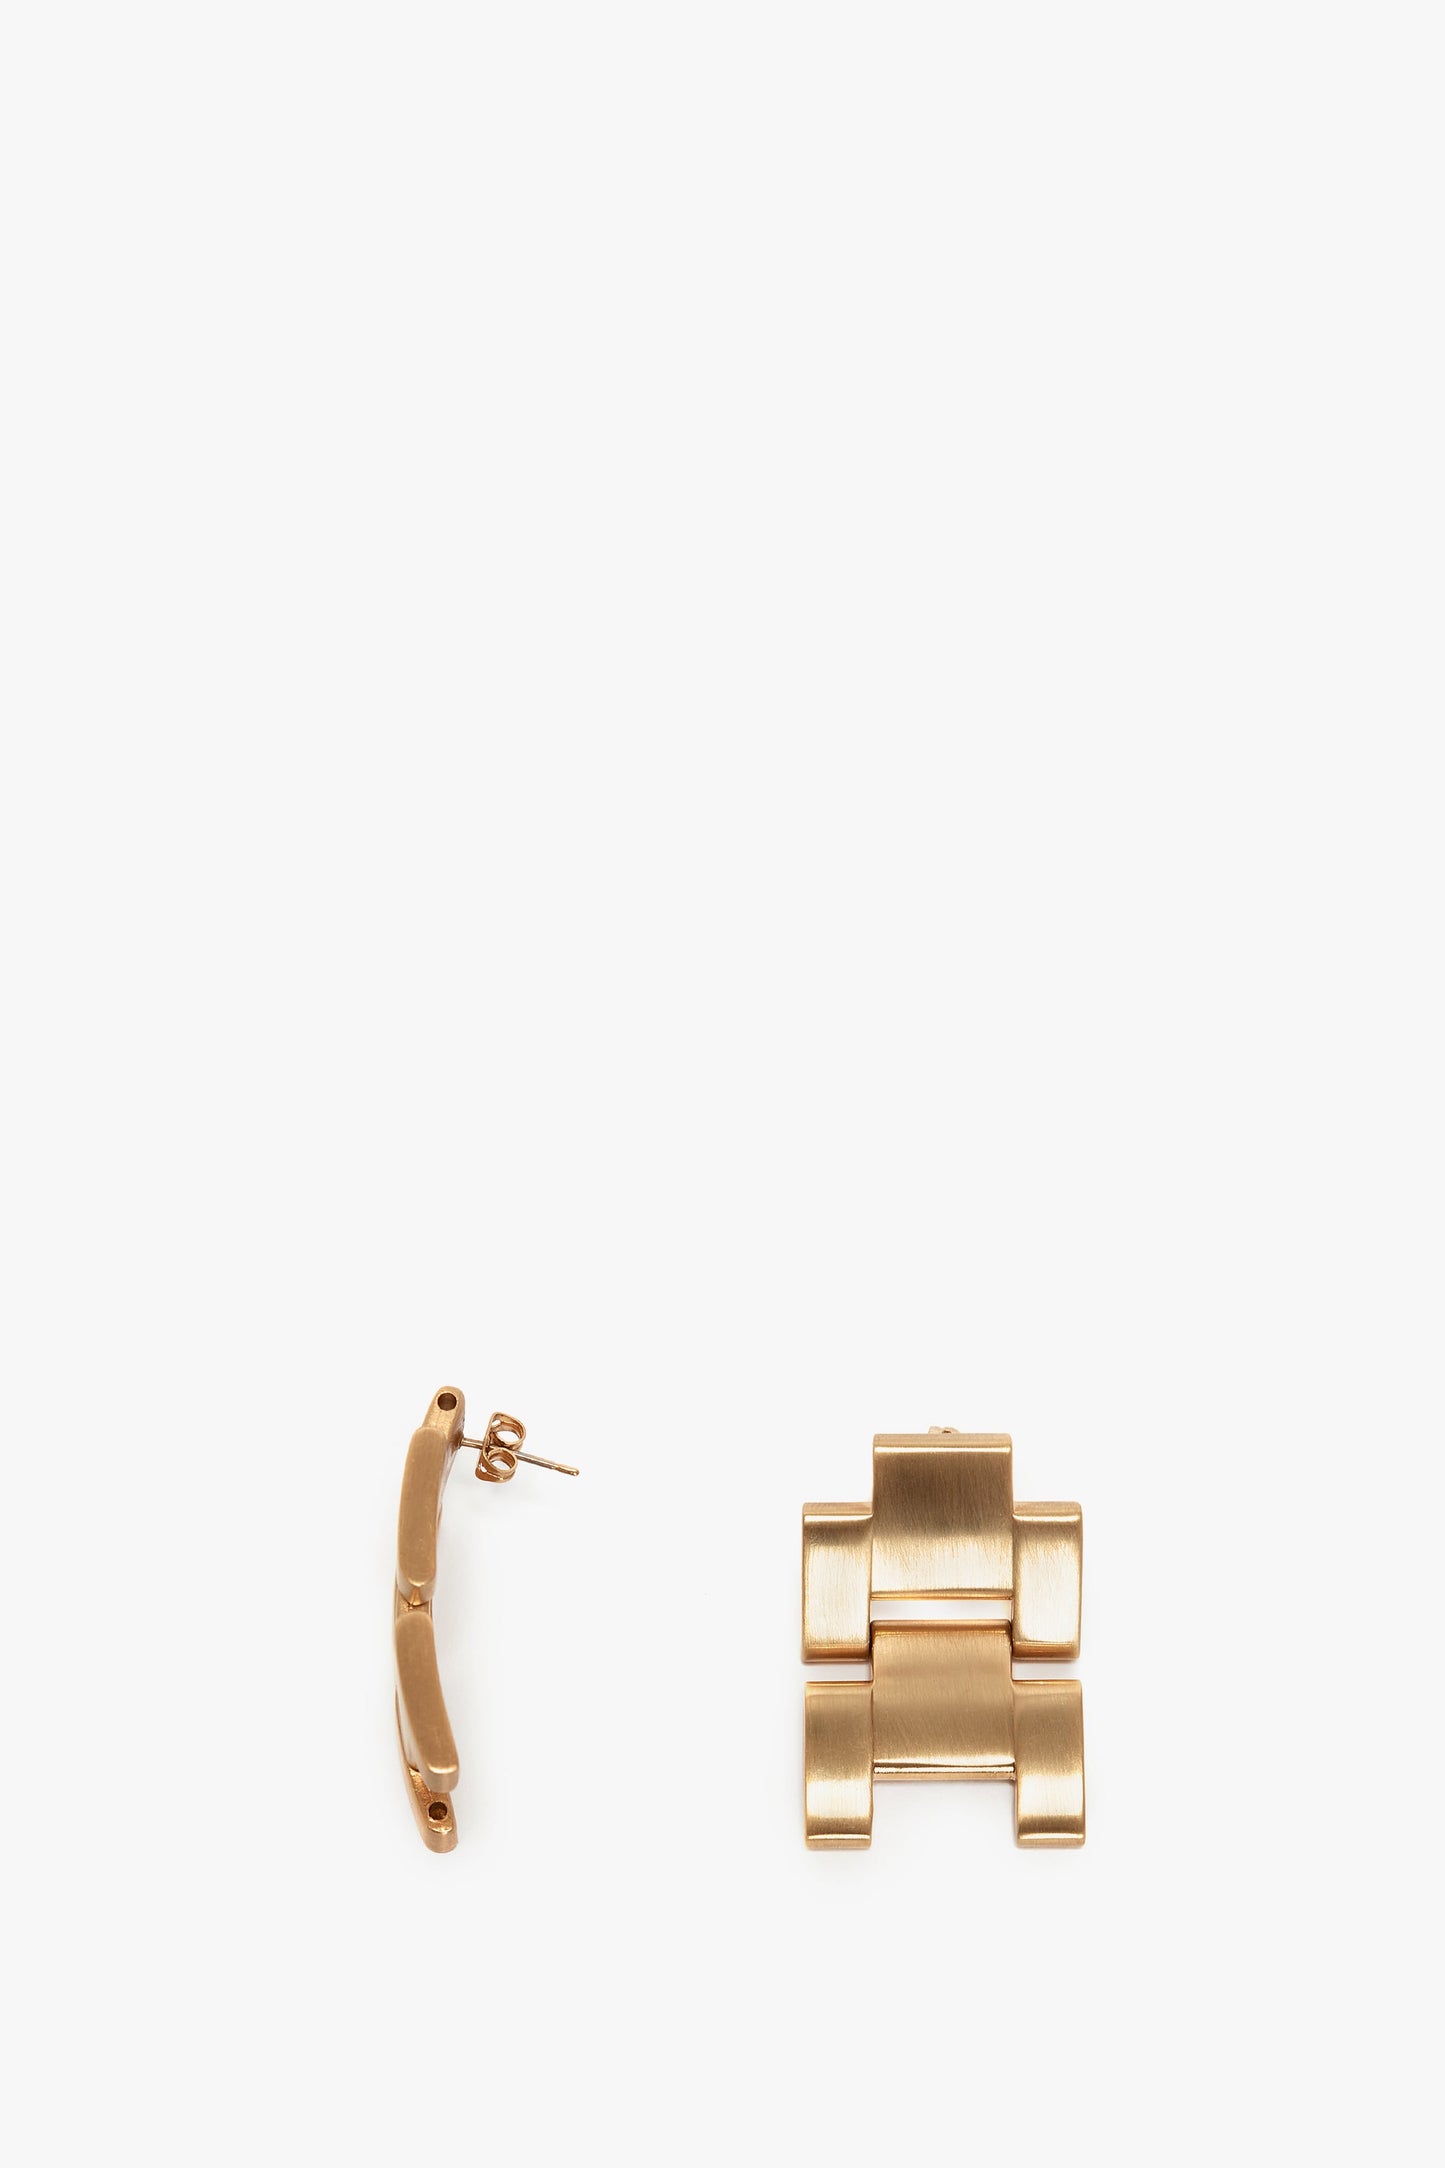 Two gold-toned metal earrings are shown. One earring is laid flat, and the other, featuring a Victoria Beckham logo, is displayed from its side to show the post and butterfly closing. The product name of these earrings is "Exclusive Jumbo Chain Earrings in Brushed Gold" by Victoria Beckham.